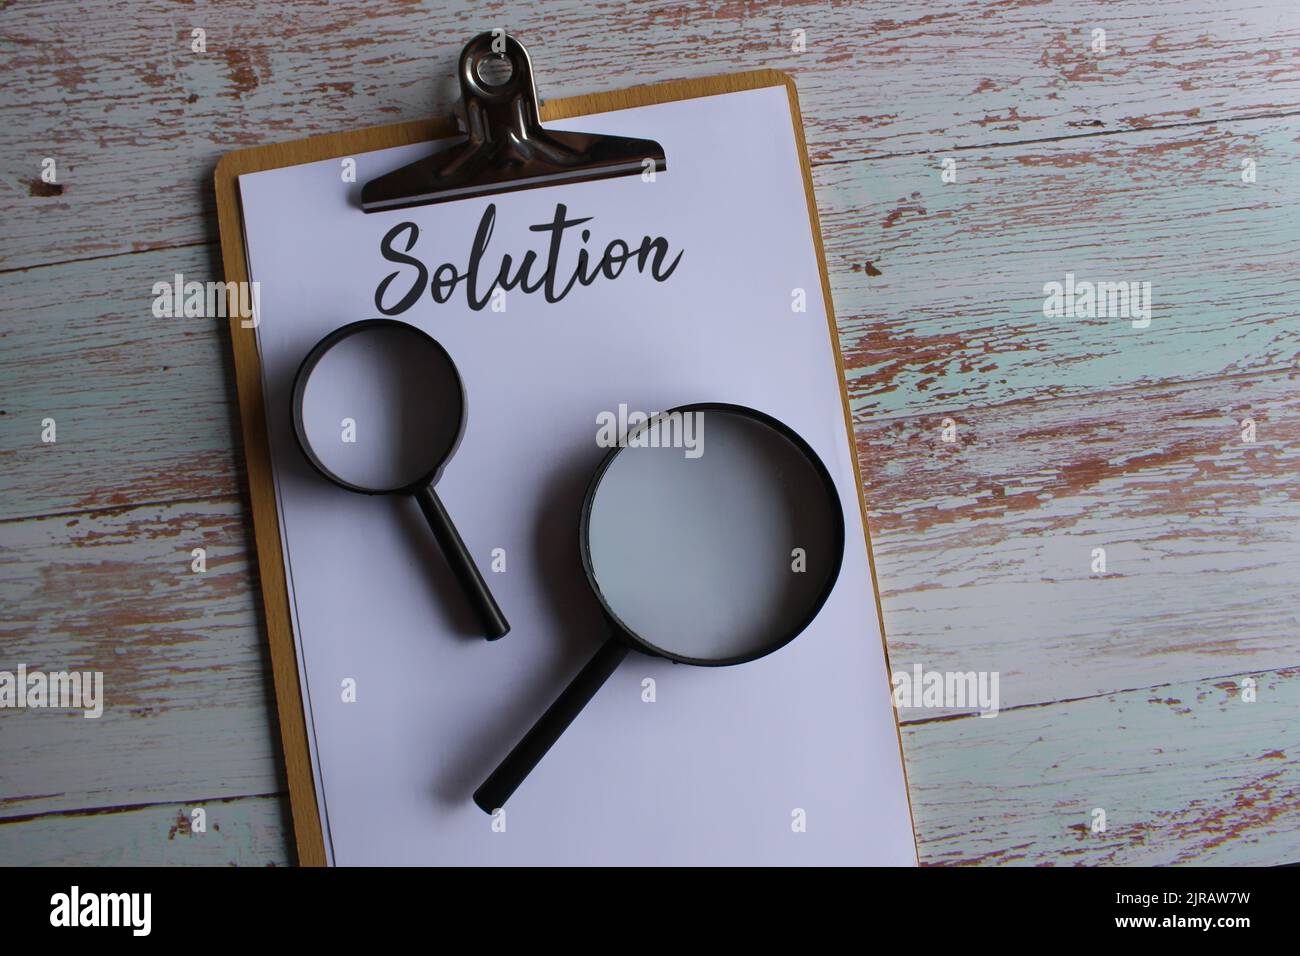 Searching for solution, finding solution concept. Magnifying glass and text SOLUTION. Stock Photo